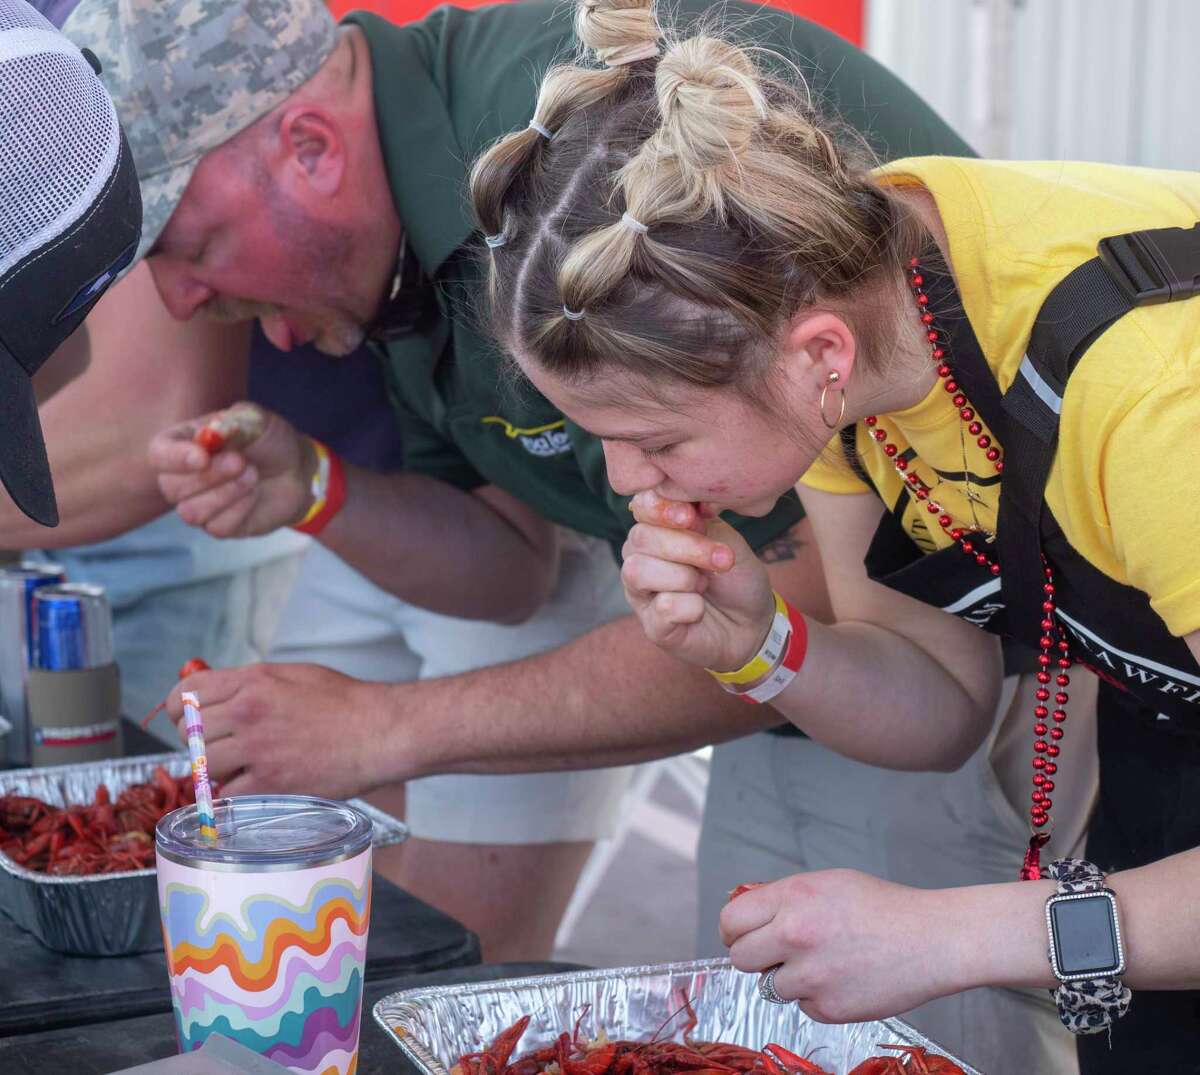 A crawfish eating contest only makes up part of Saturday's mudbug festivities at The Destination.  File photo: Contestants dig in to their 3 lbs. of crawfish during the crawfish eating contest as thousands of crawfish lovers came out for the 1st Crawfish Cook-off 04/09/2020 at The Tailgate. Tim Fischer/Reporter-Telegram